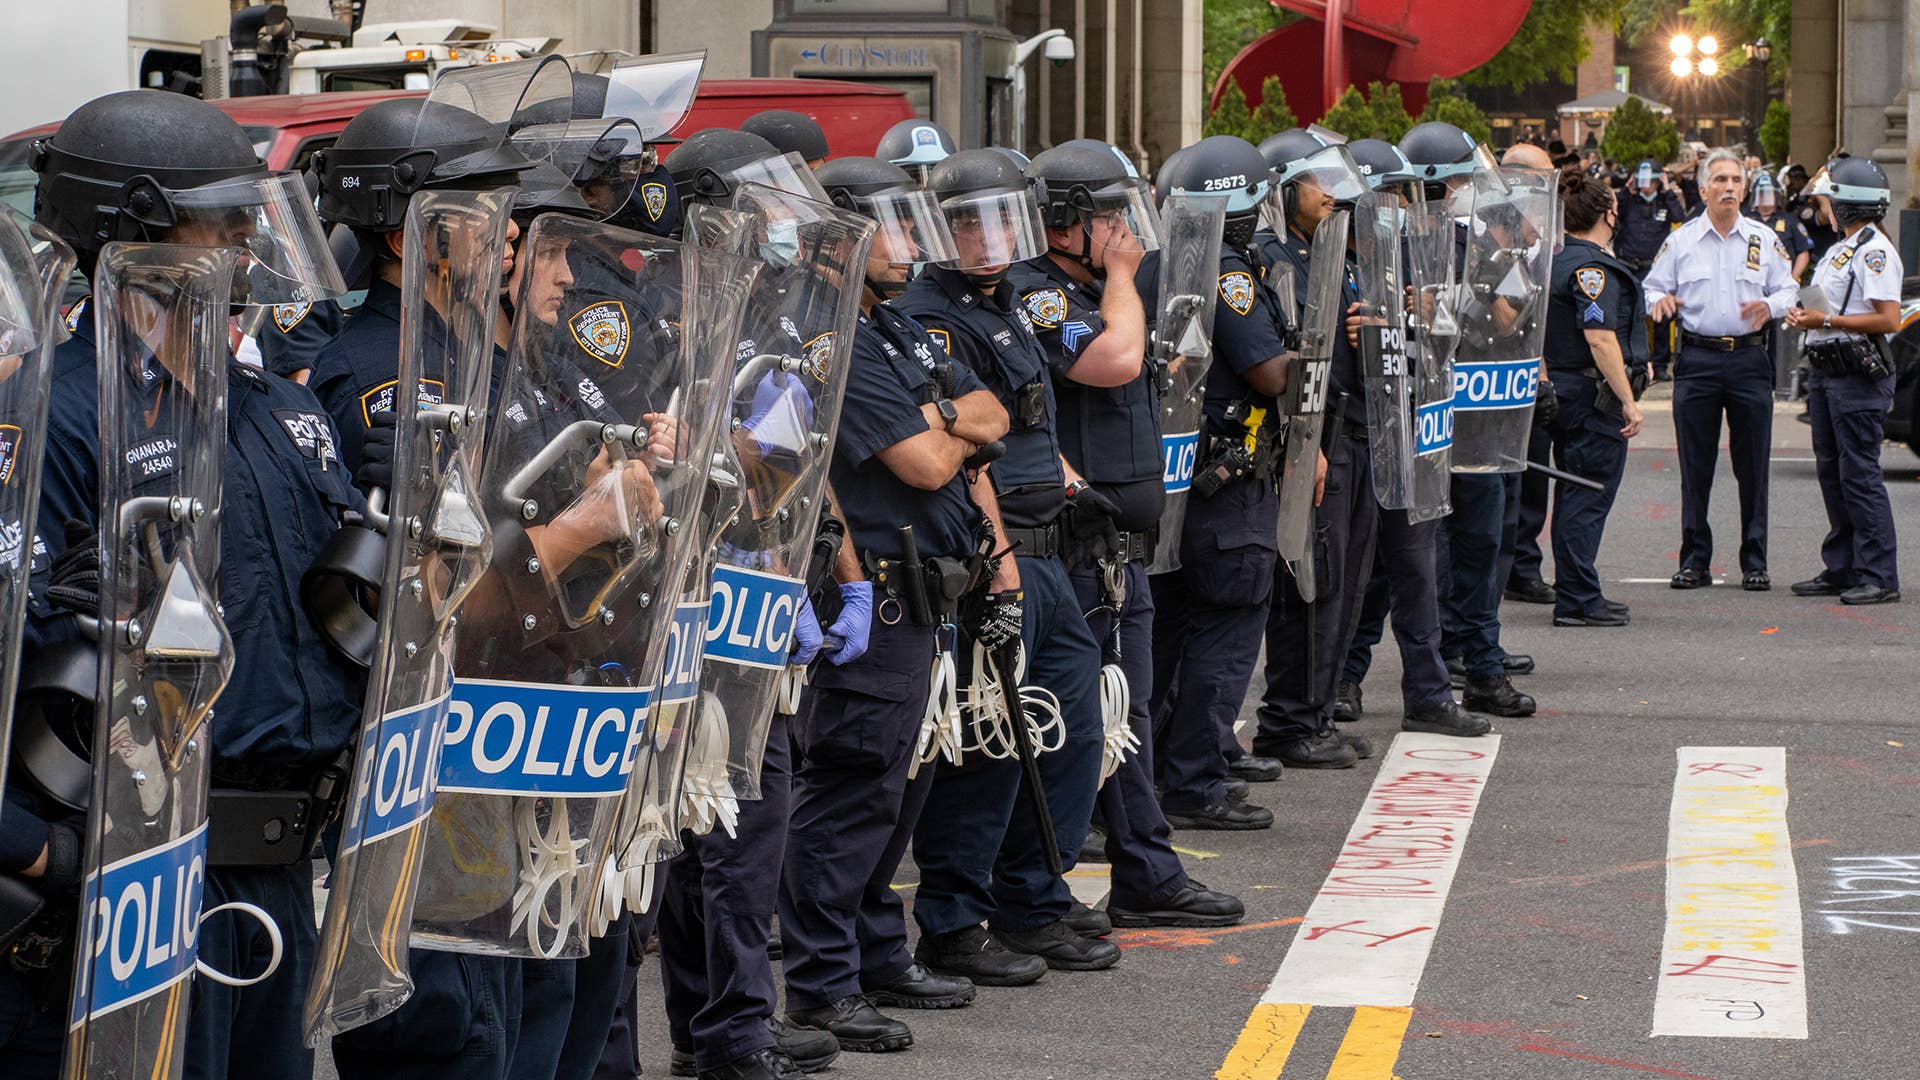 Protesters and police officers clash for the second morning in a row on July 1, 2020 in New York City